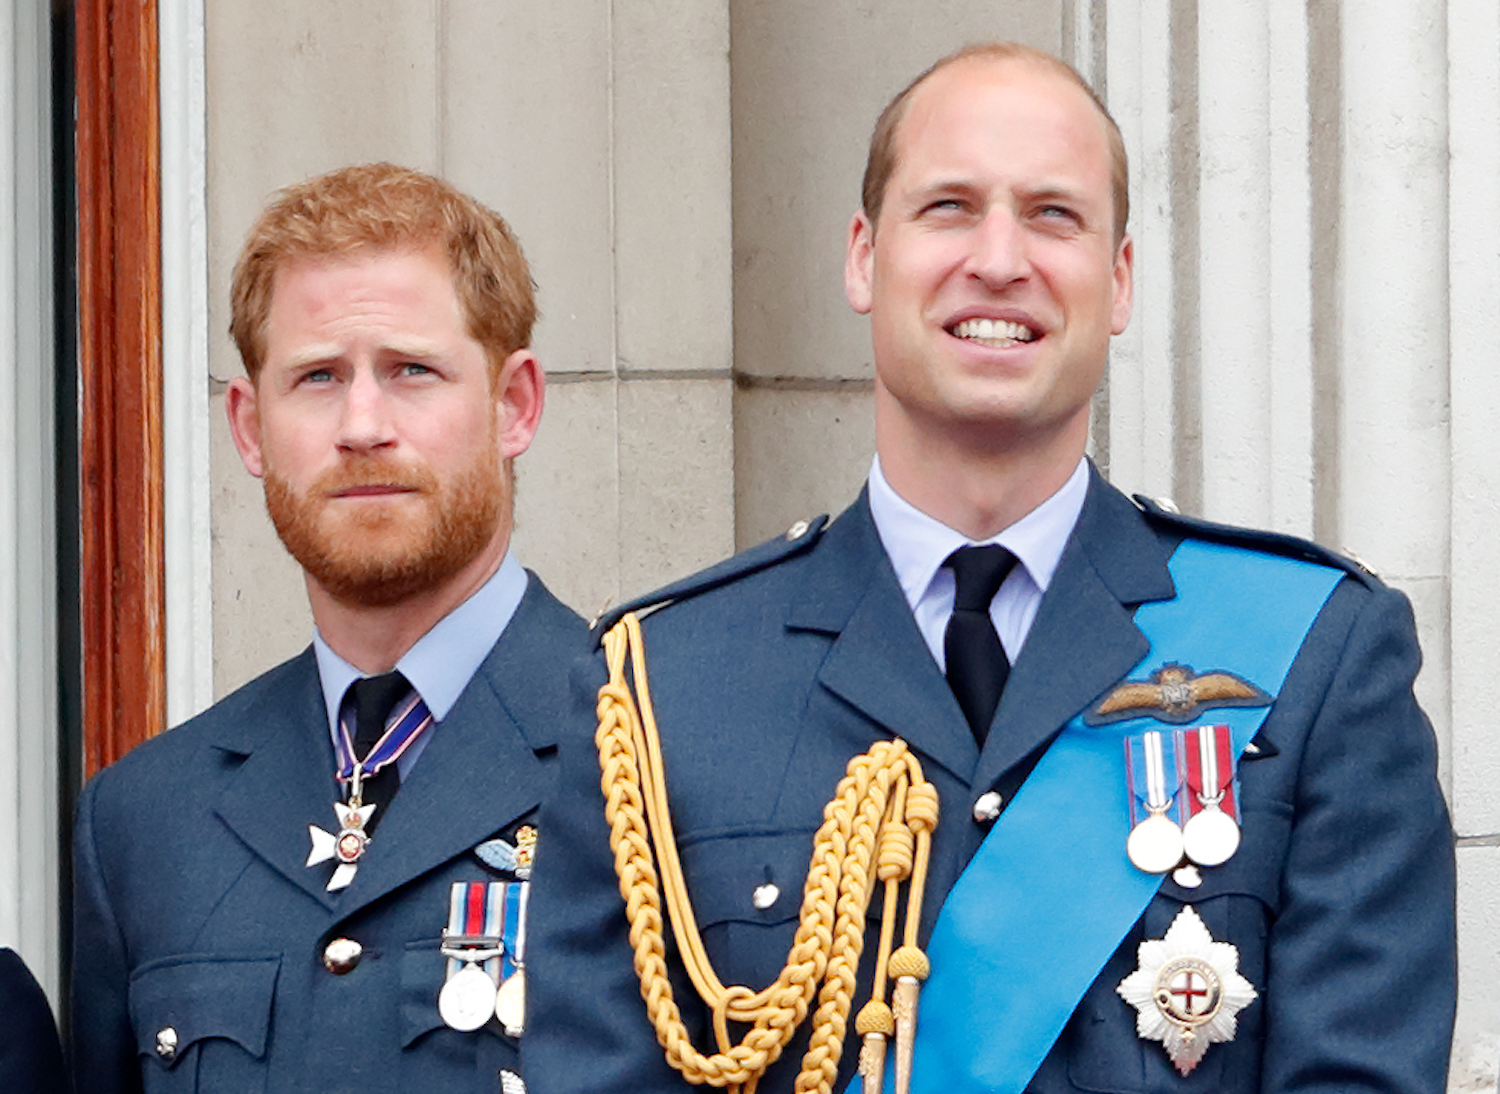 Prince Harry and Prince William watch a flypast to mark the centenary of the Royal Air Force from the balcony of Buckingham Palace